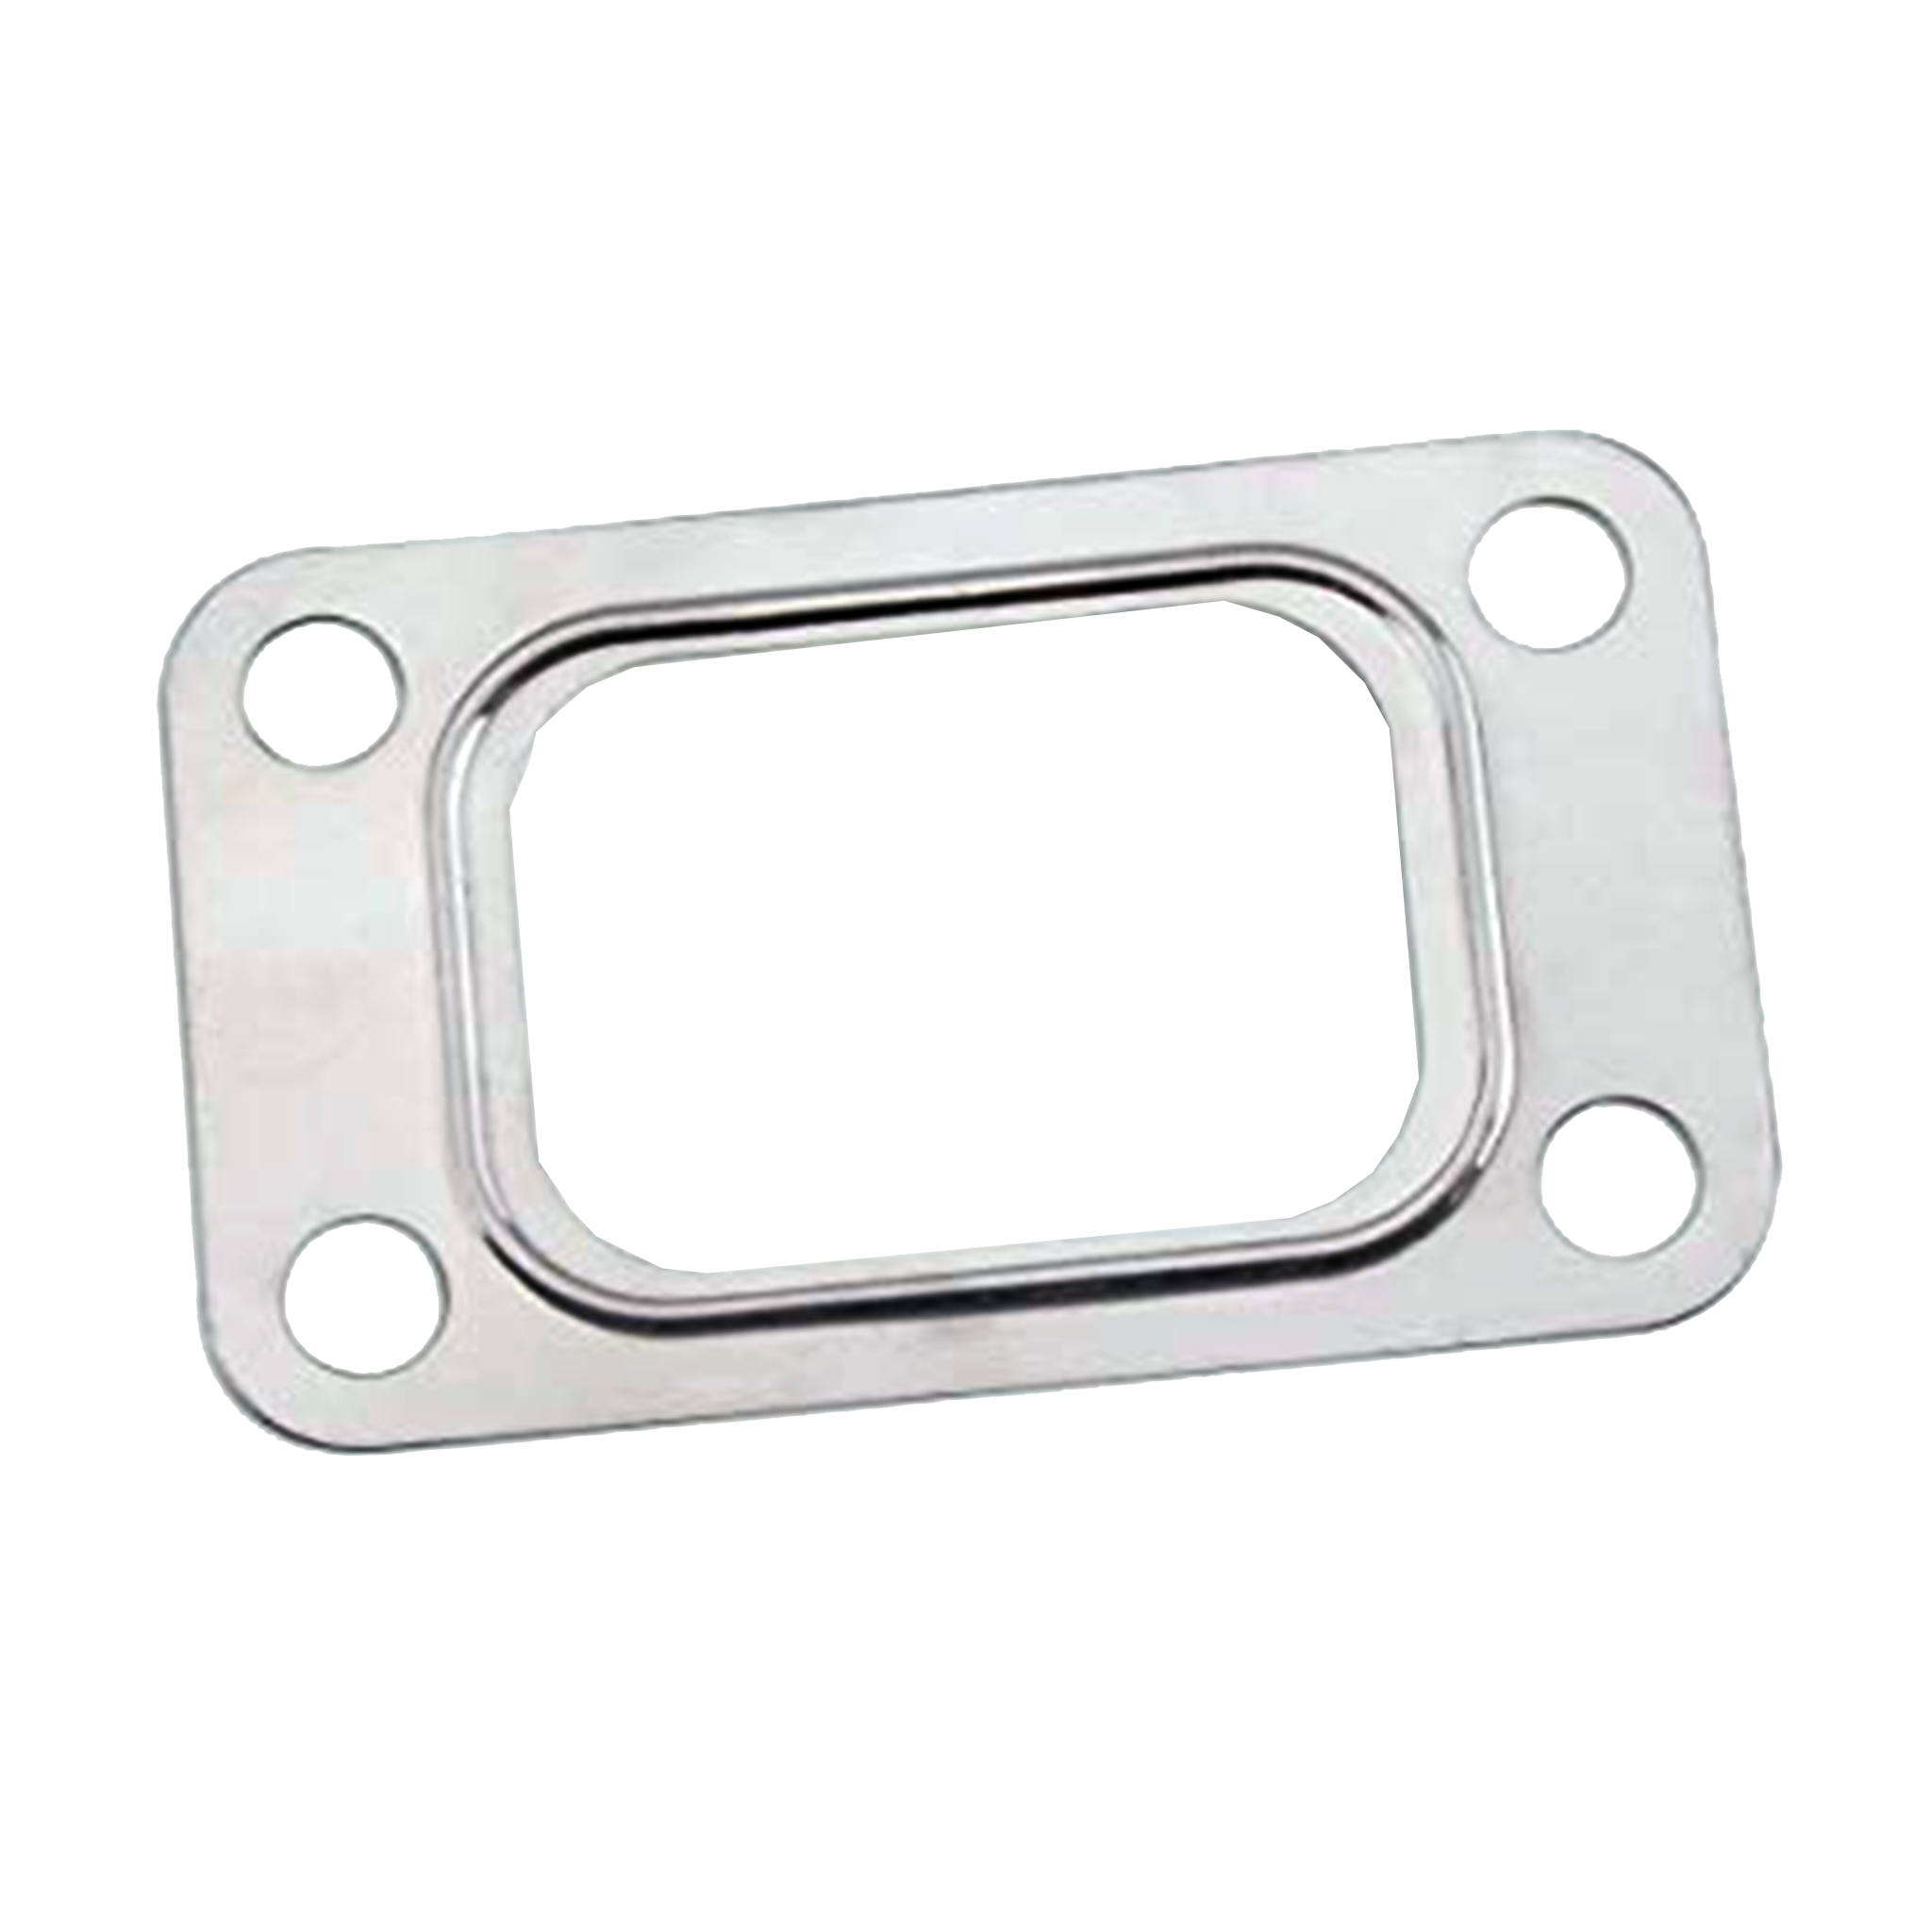 Stainless steel gasket for T4 turbine inlet